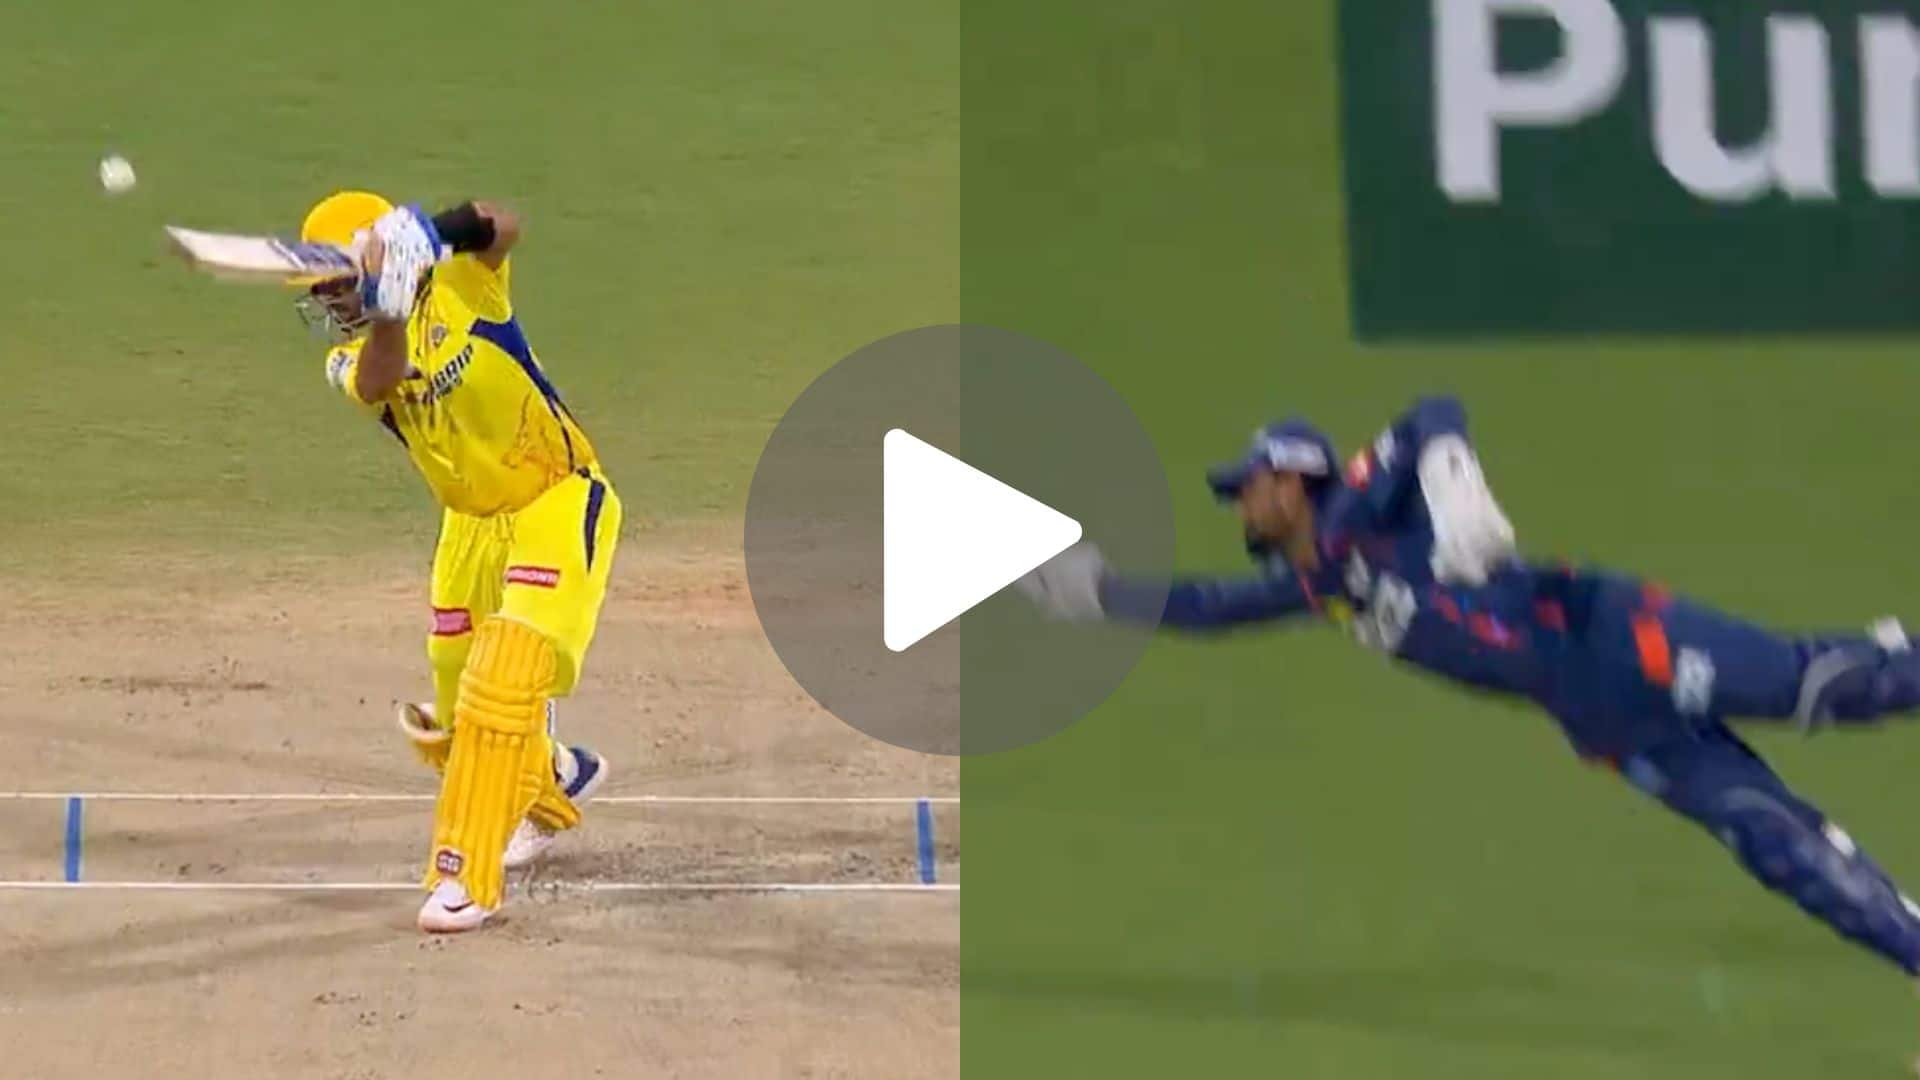 [Watch] KL Rahul Grabs A Jaw-Dropping Catch As Rahane Departs For 1